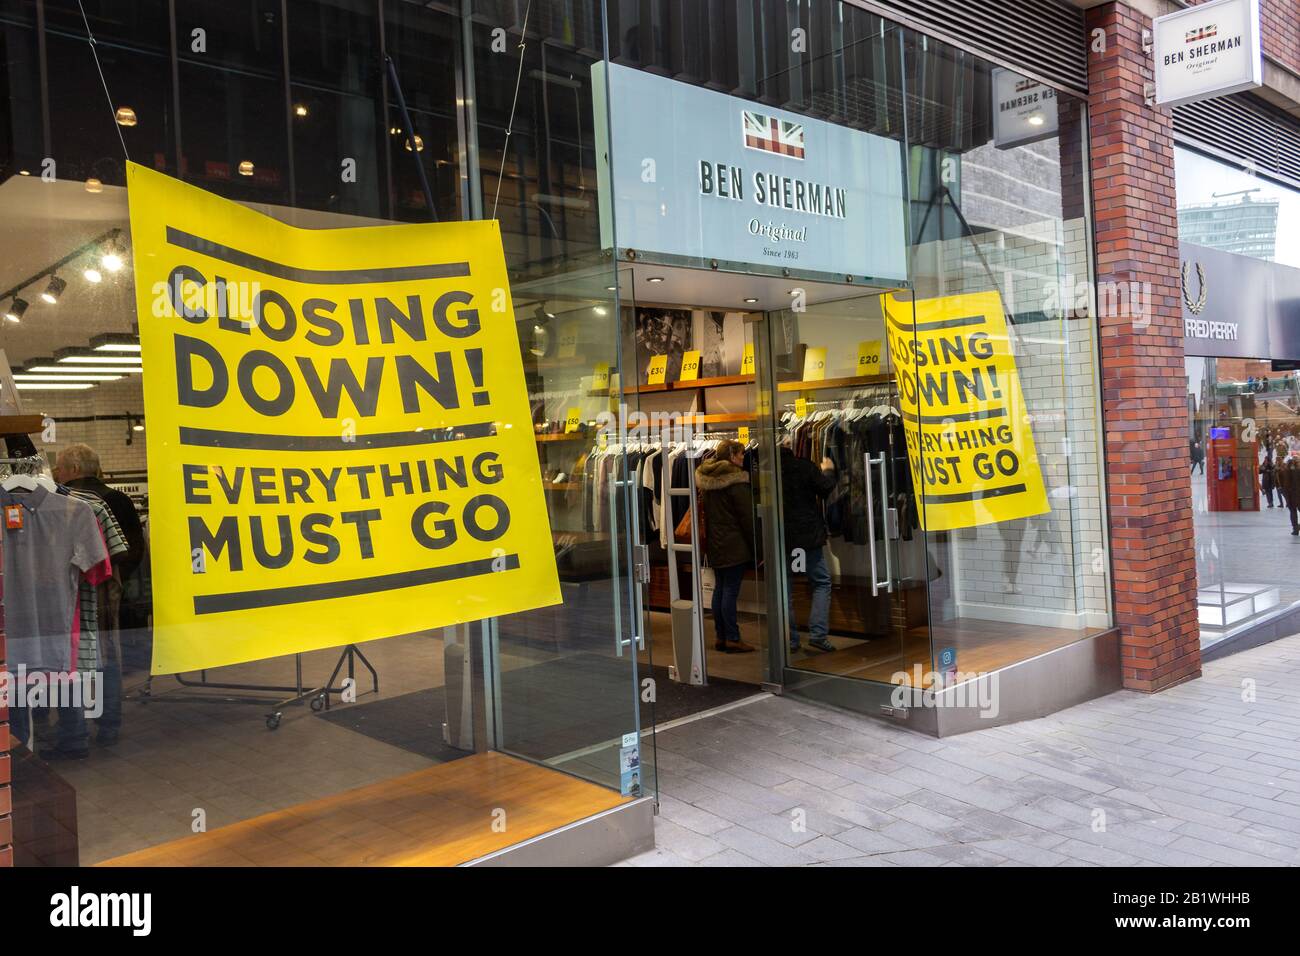 Closing Down sign at Ben Sherman menswear clothing store, Manesty's Lane, Liverpool ONE shopping centre Stock Photo